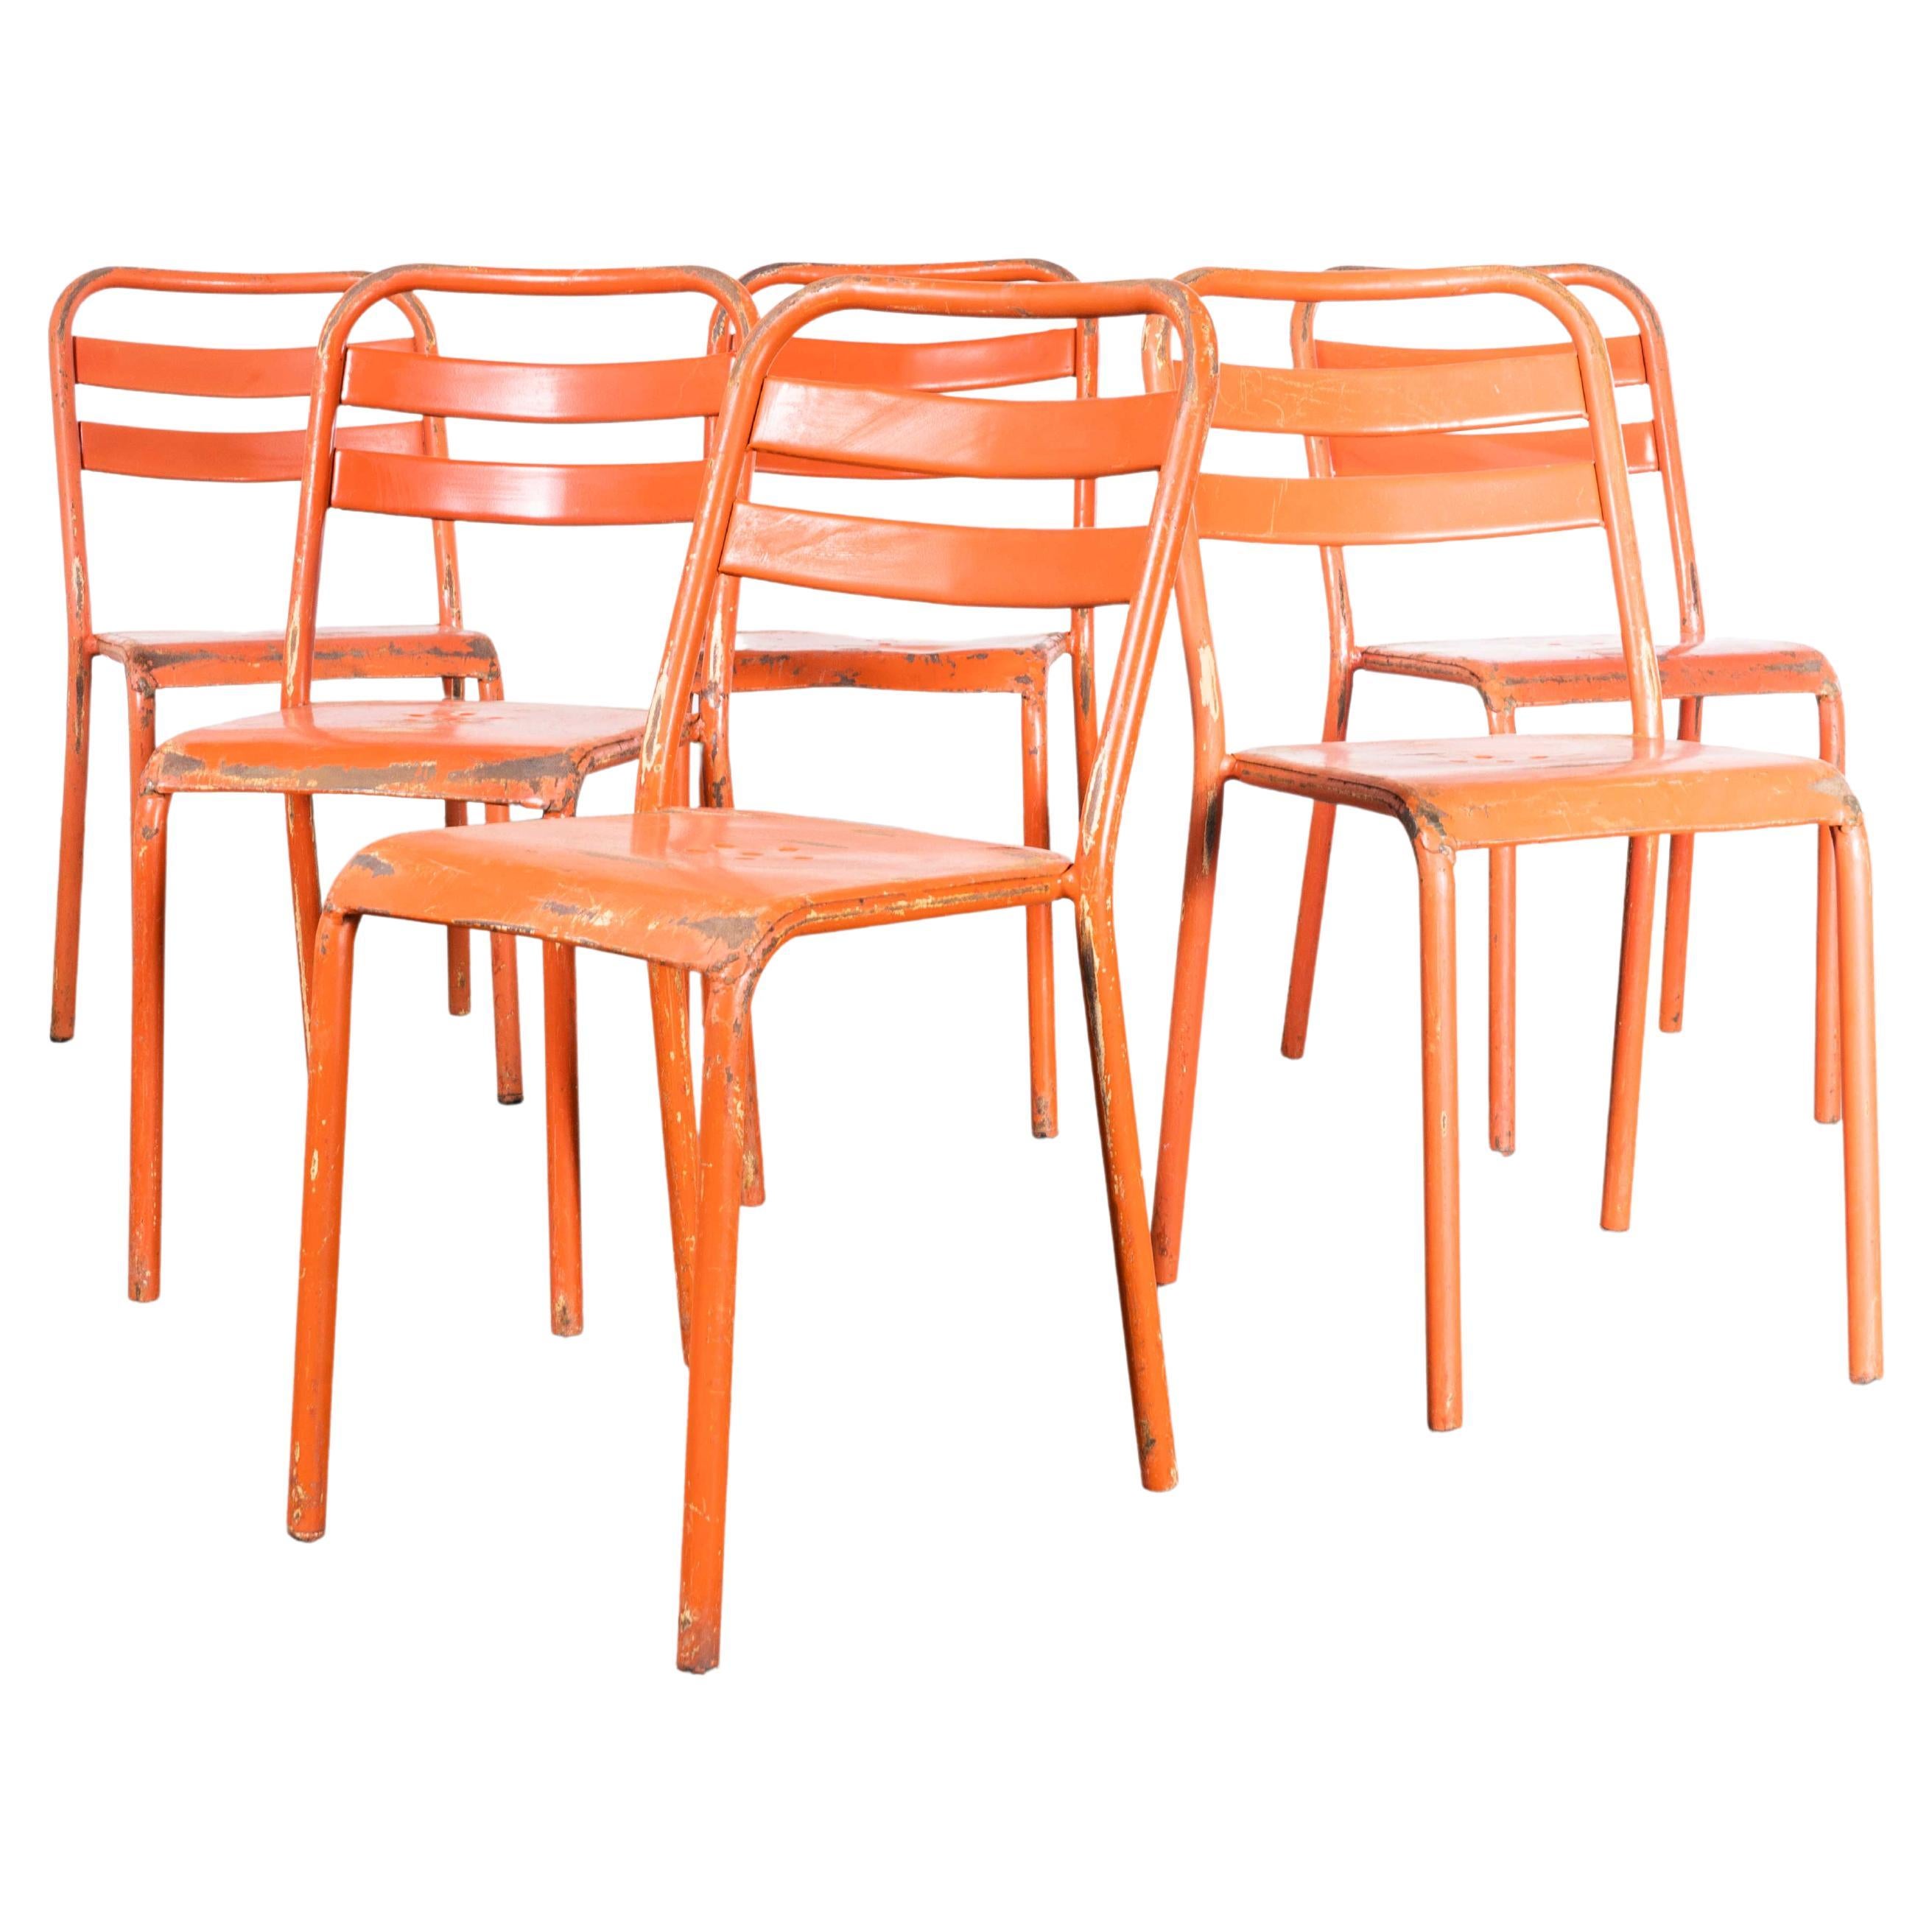 1960's Original Red French Tolix T2 Metal Outdoor Dining Chairs - Set Of Six For Sale